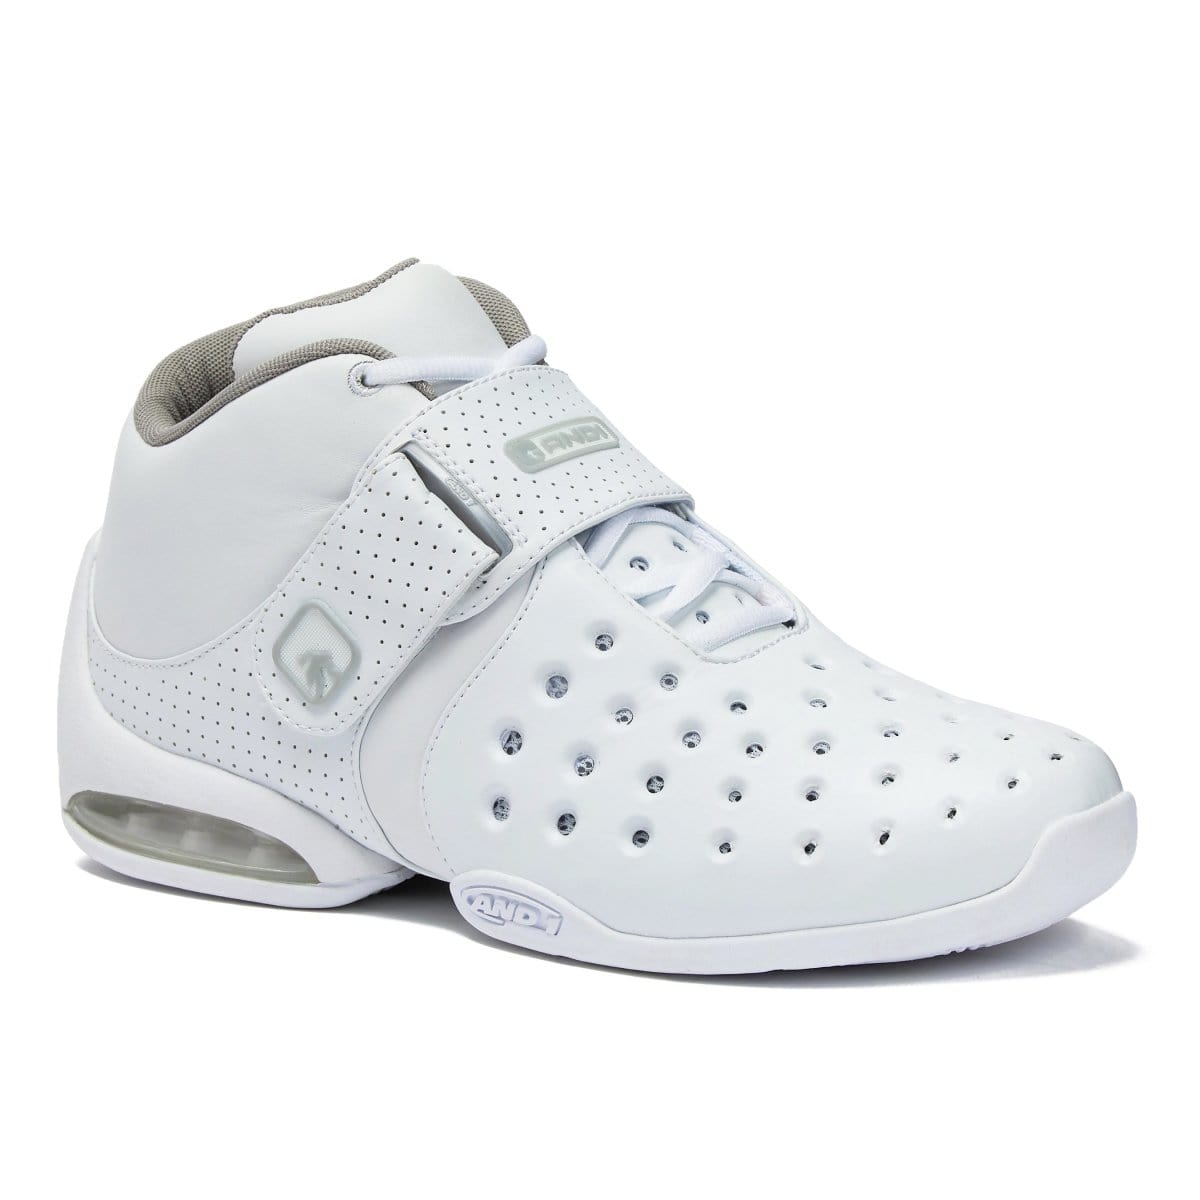 AND-1 AND-1 MEN'S CHOSE ONE TRIPLE WHITE BASKETBALL SHOES - INSPORT